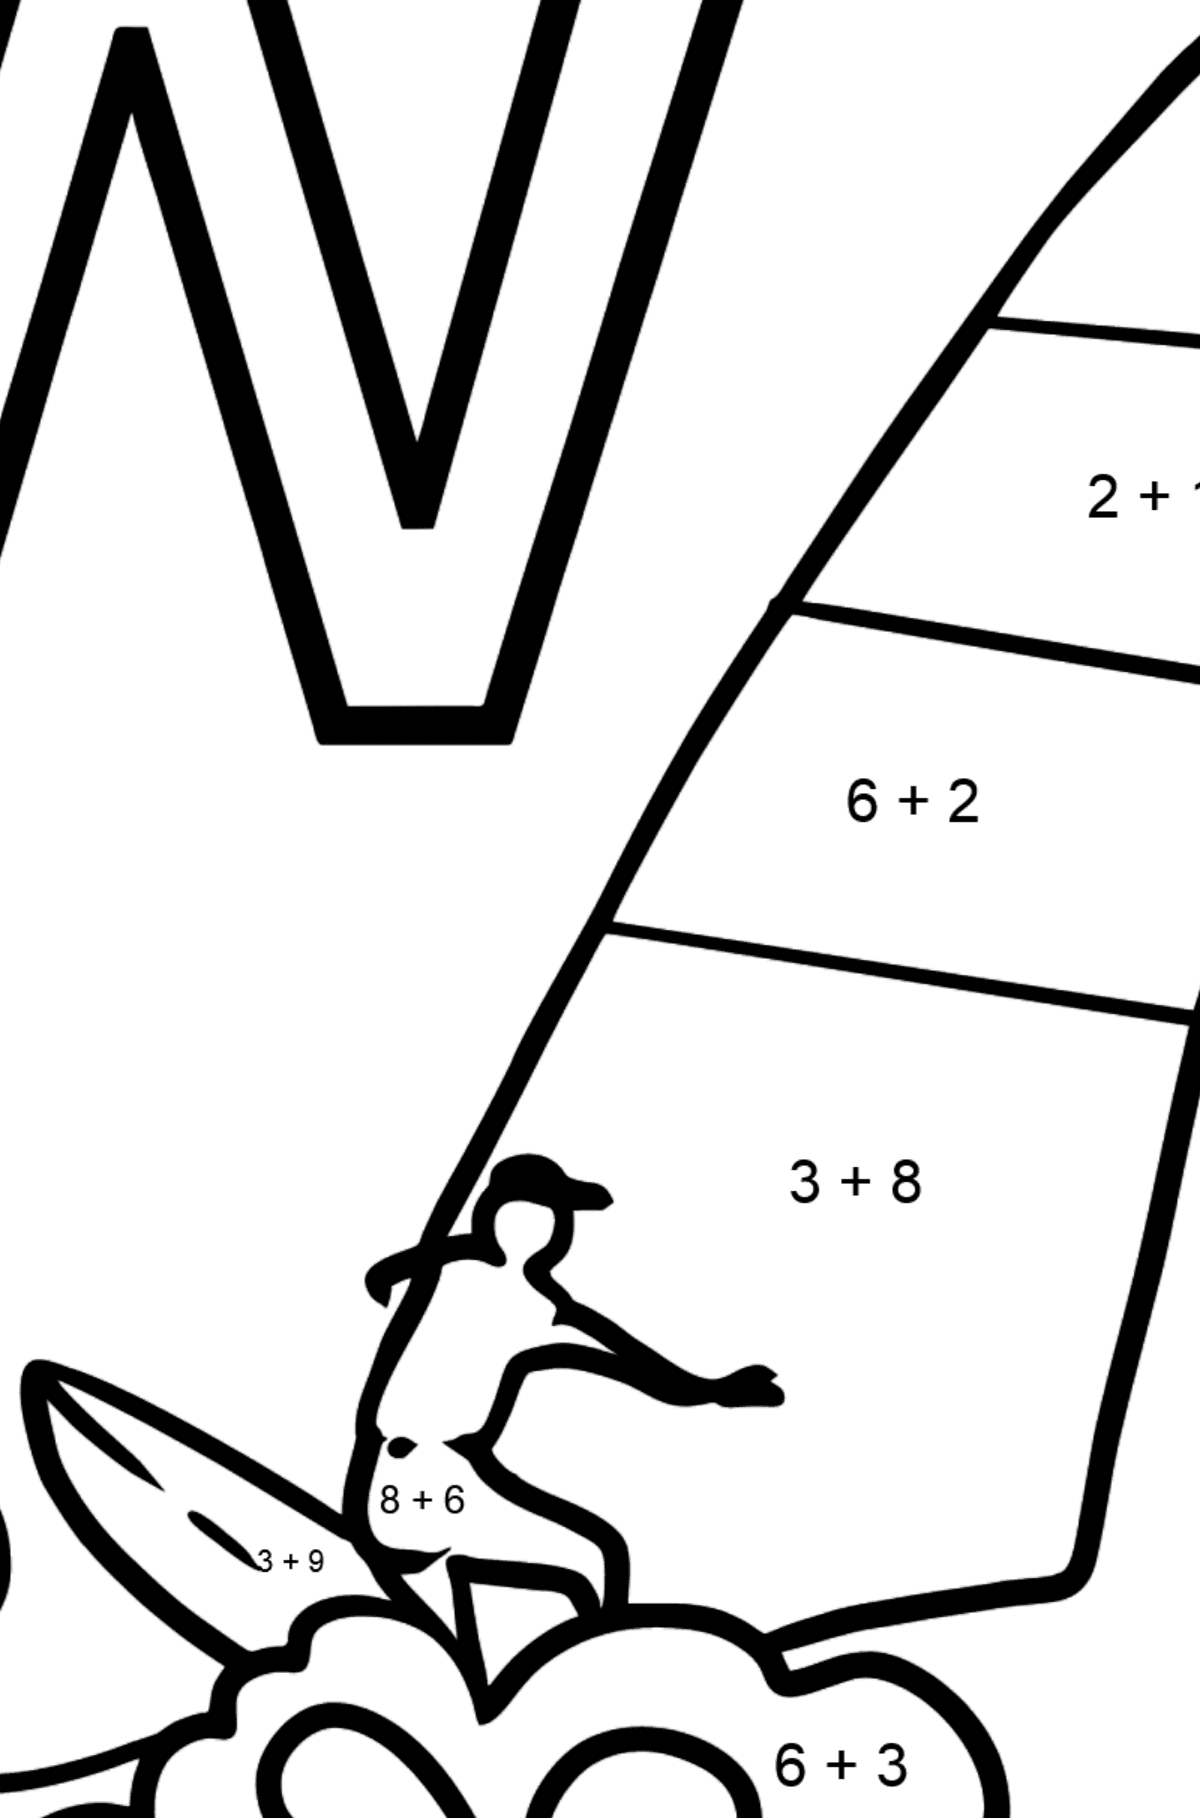 Spanish Letter W coloring pages - WINDSURF - Math Coloring - Addition for Kids